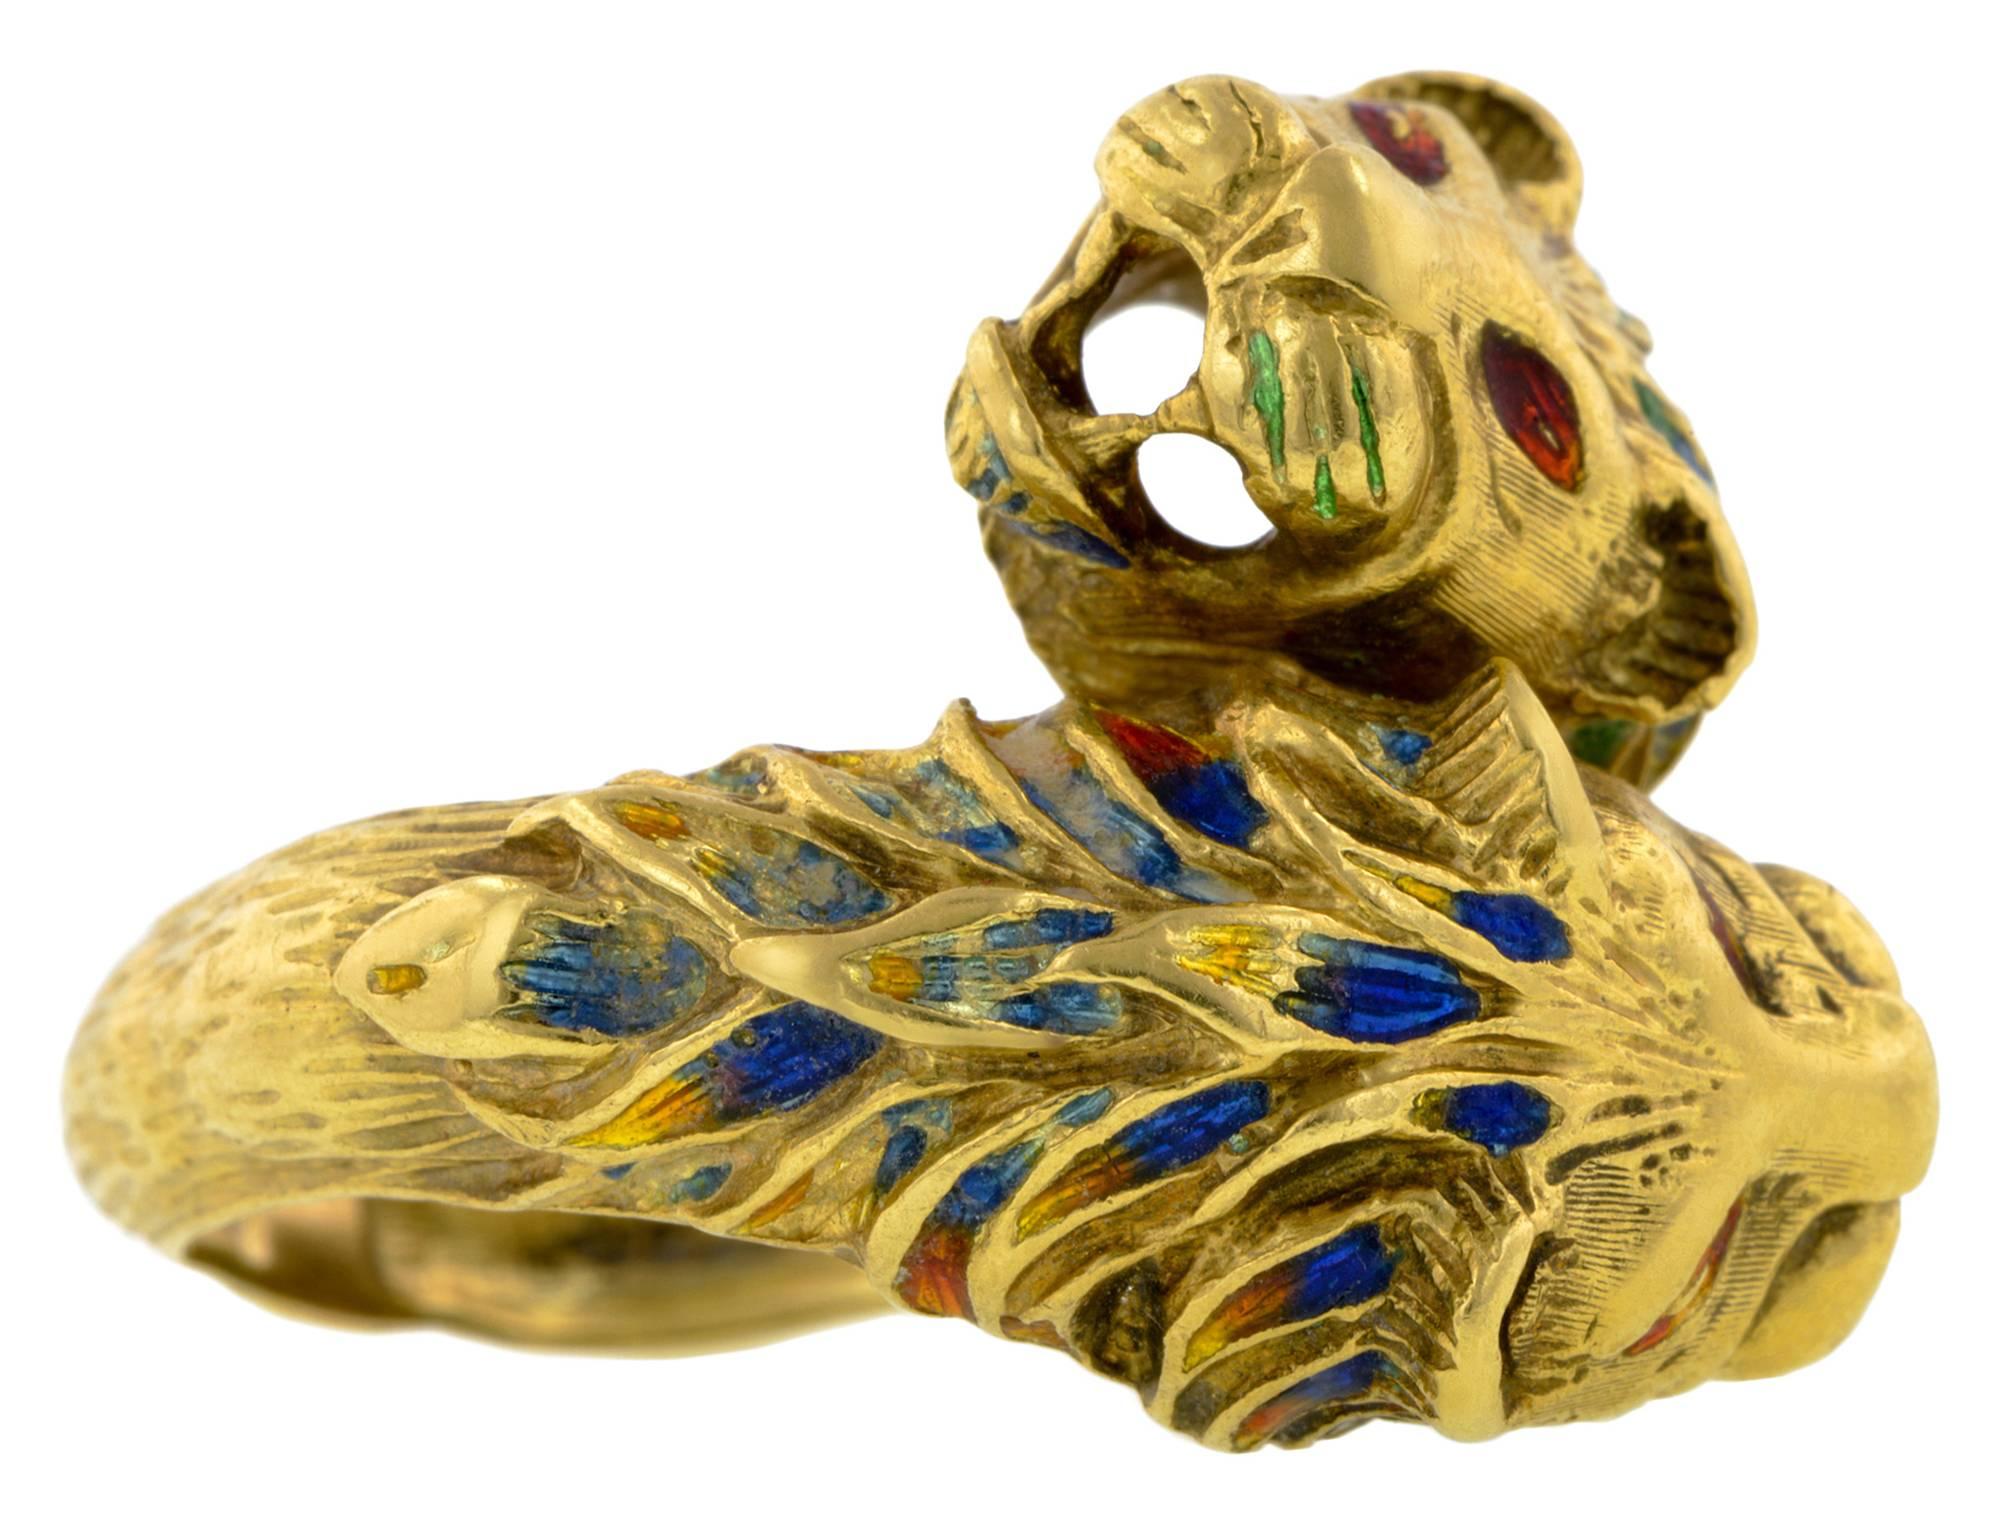 Two engraved lion heads with green, blue, red & yellow enamel* in a crossover design, fashioned in 18k. Second half 20th century. Size 7.5 This ring cannot be sized. *Although vitreous enamel forms a hard, durable surface, it is susceptible to